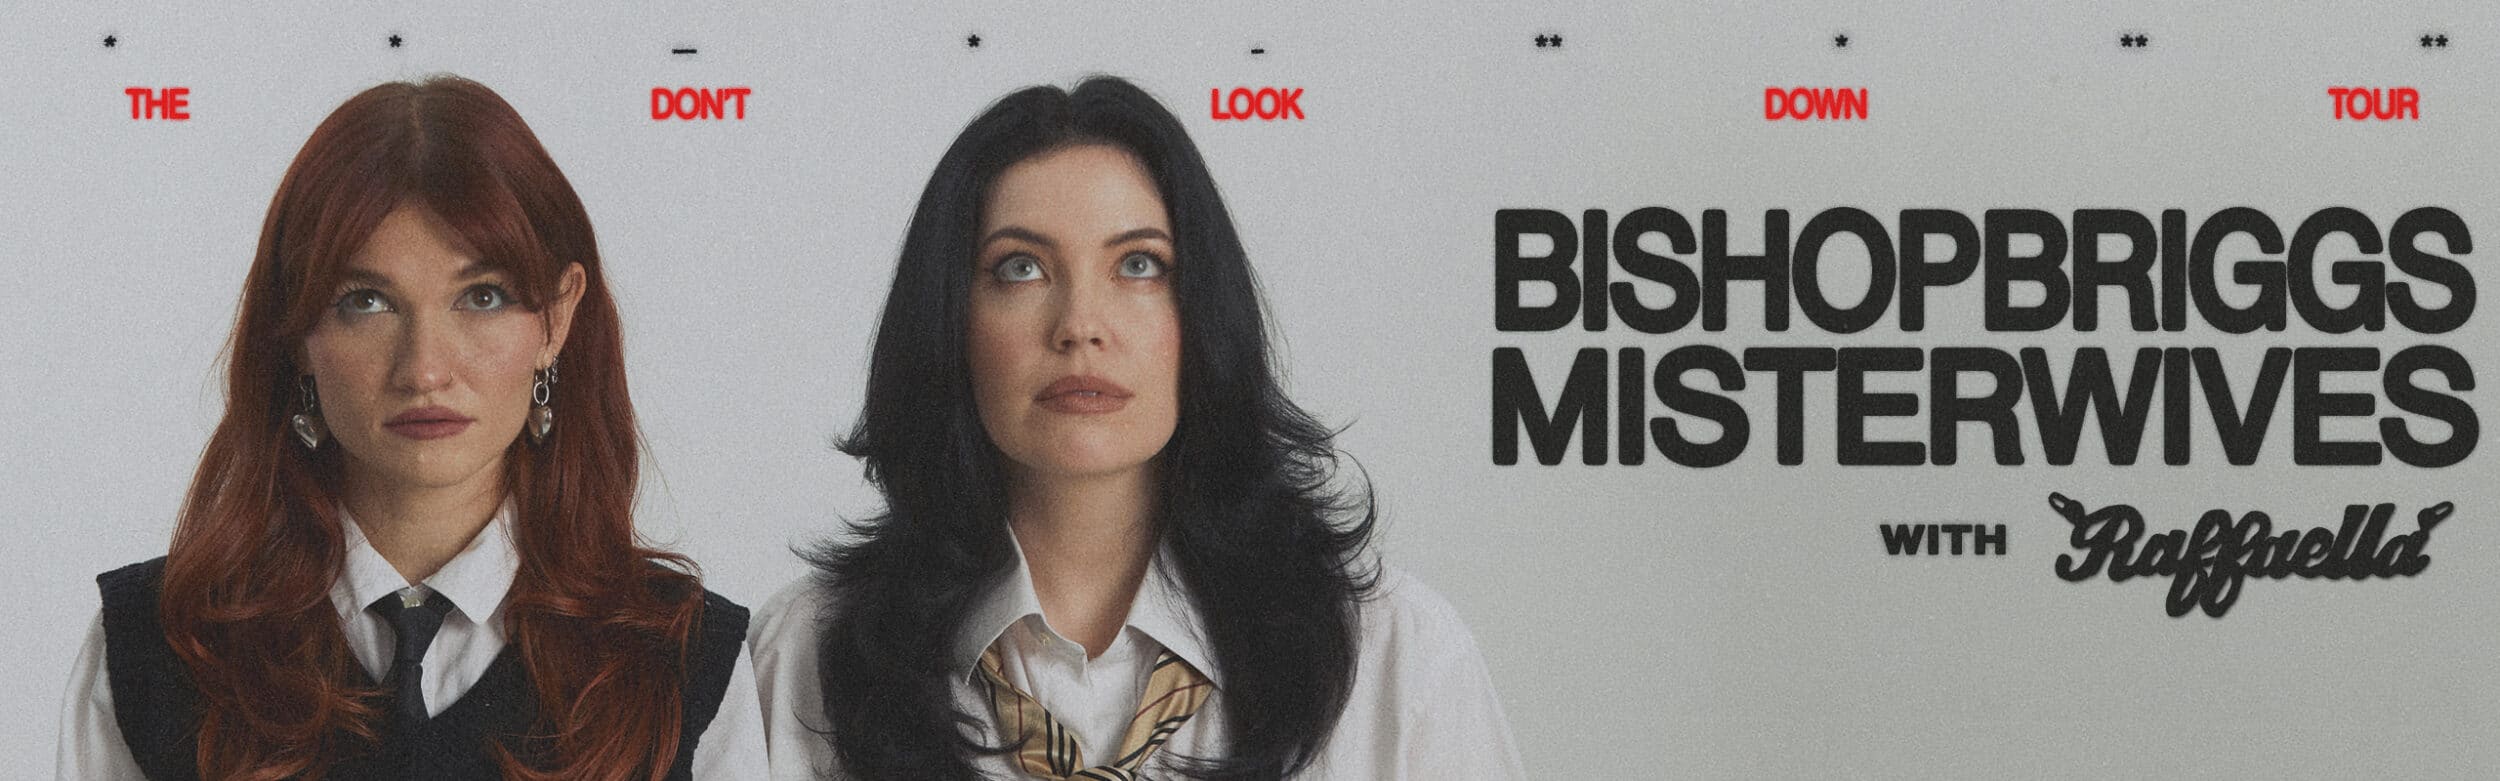 Bishop Briggs & MisterWives – The Don’t Look Down Tour